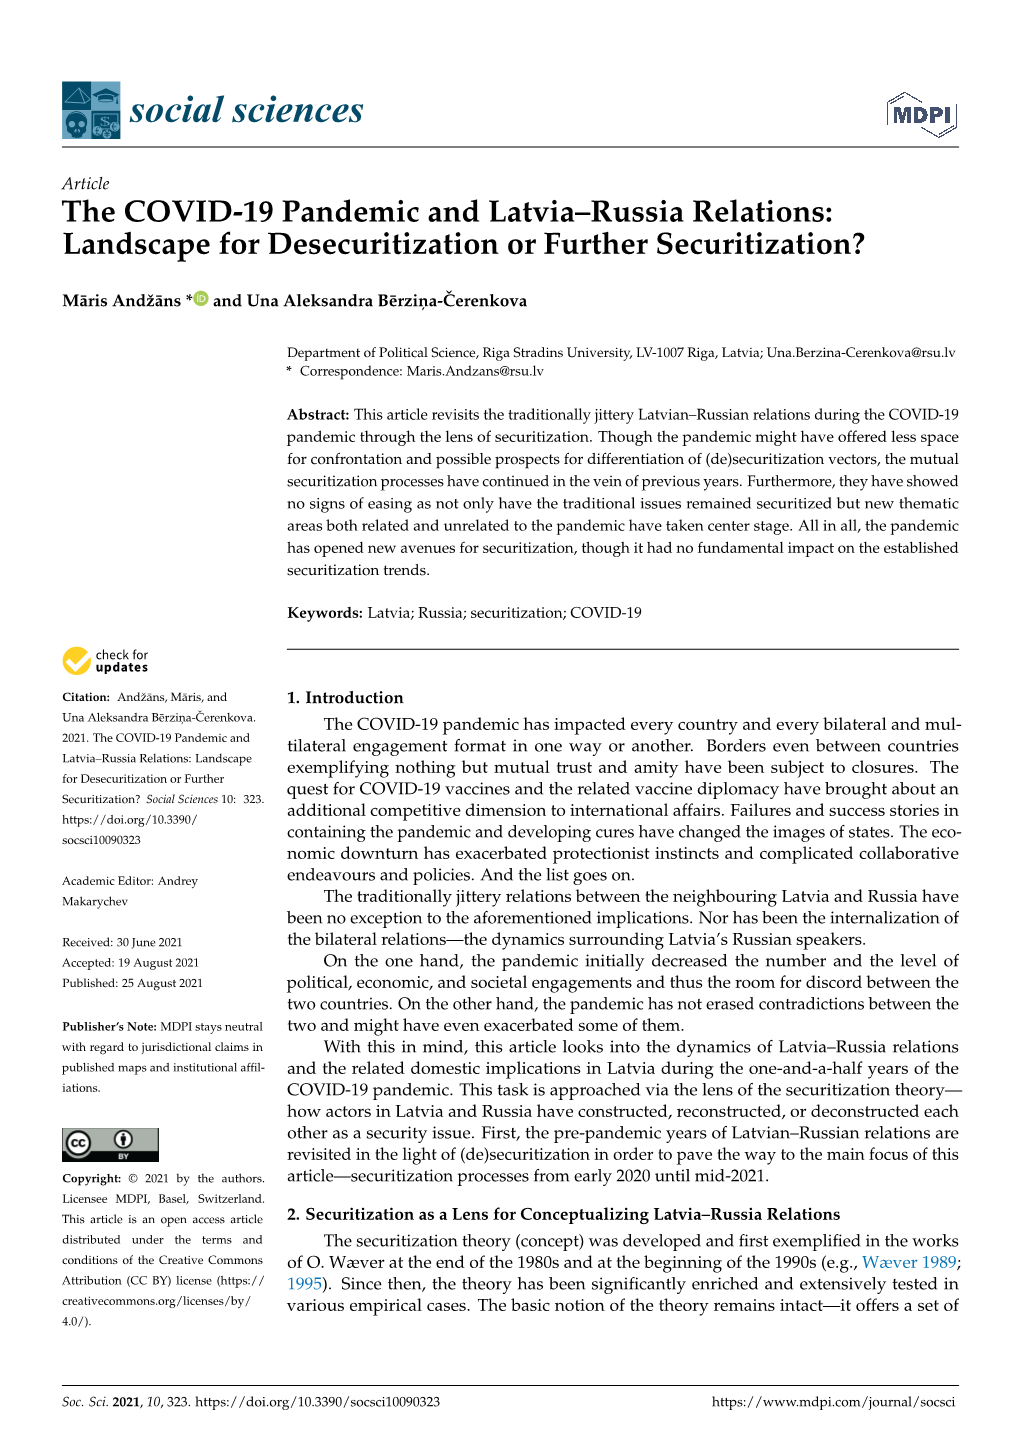 The COVID-19 Pandemic and Latvia–Russia Relations: Landscape for Desecuritization Or Further Securitization?